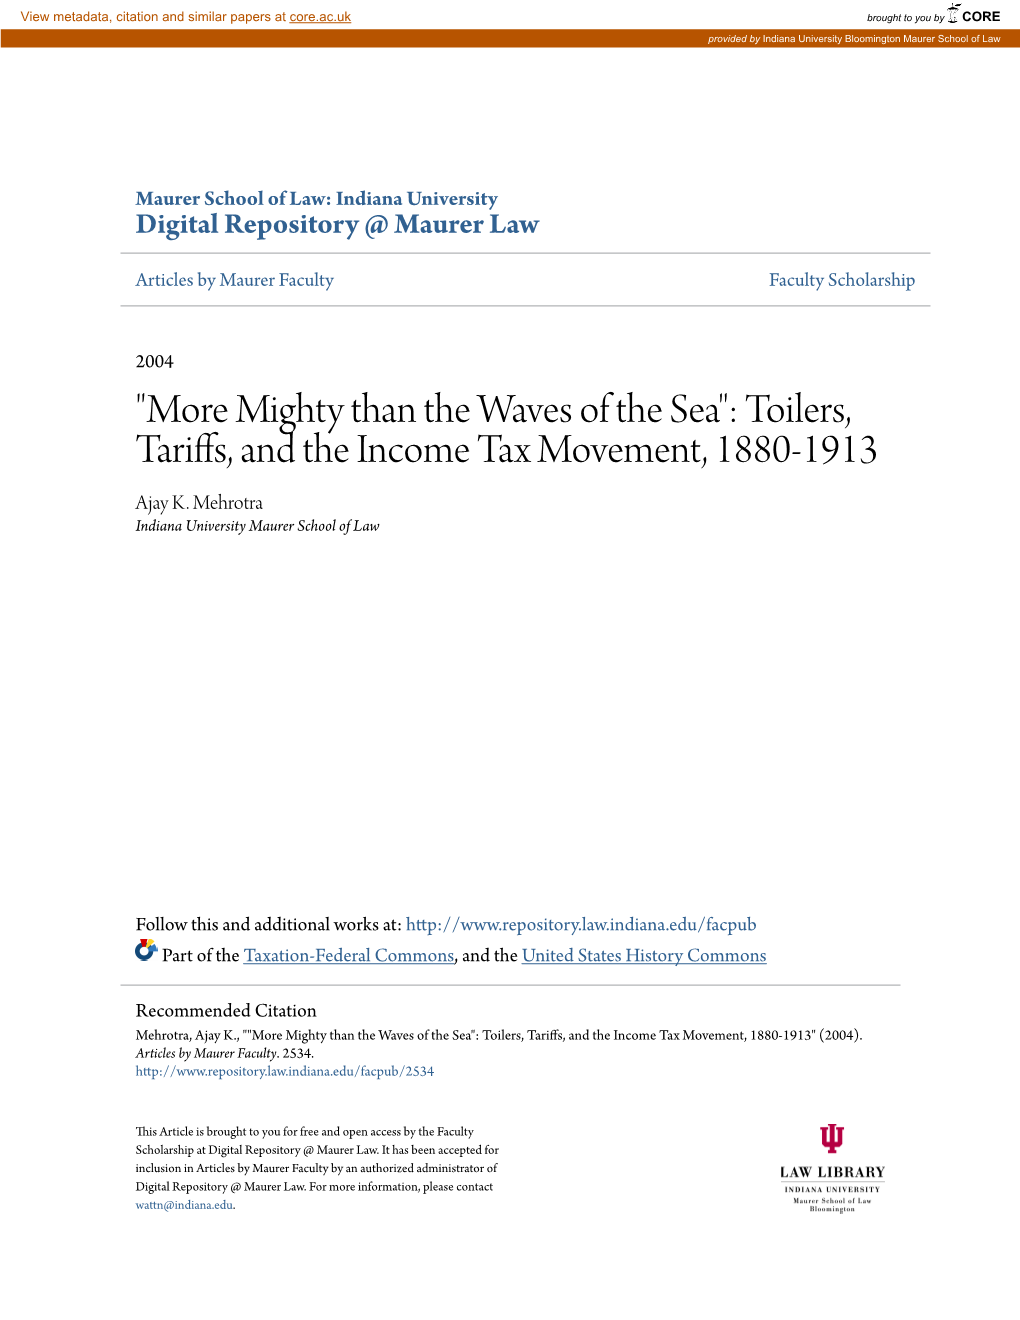 Toilers, Tariffs, and the Income Tax Movement, 1880-1913 Ajay K